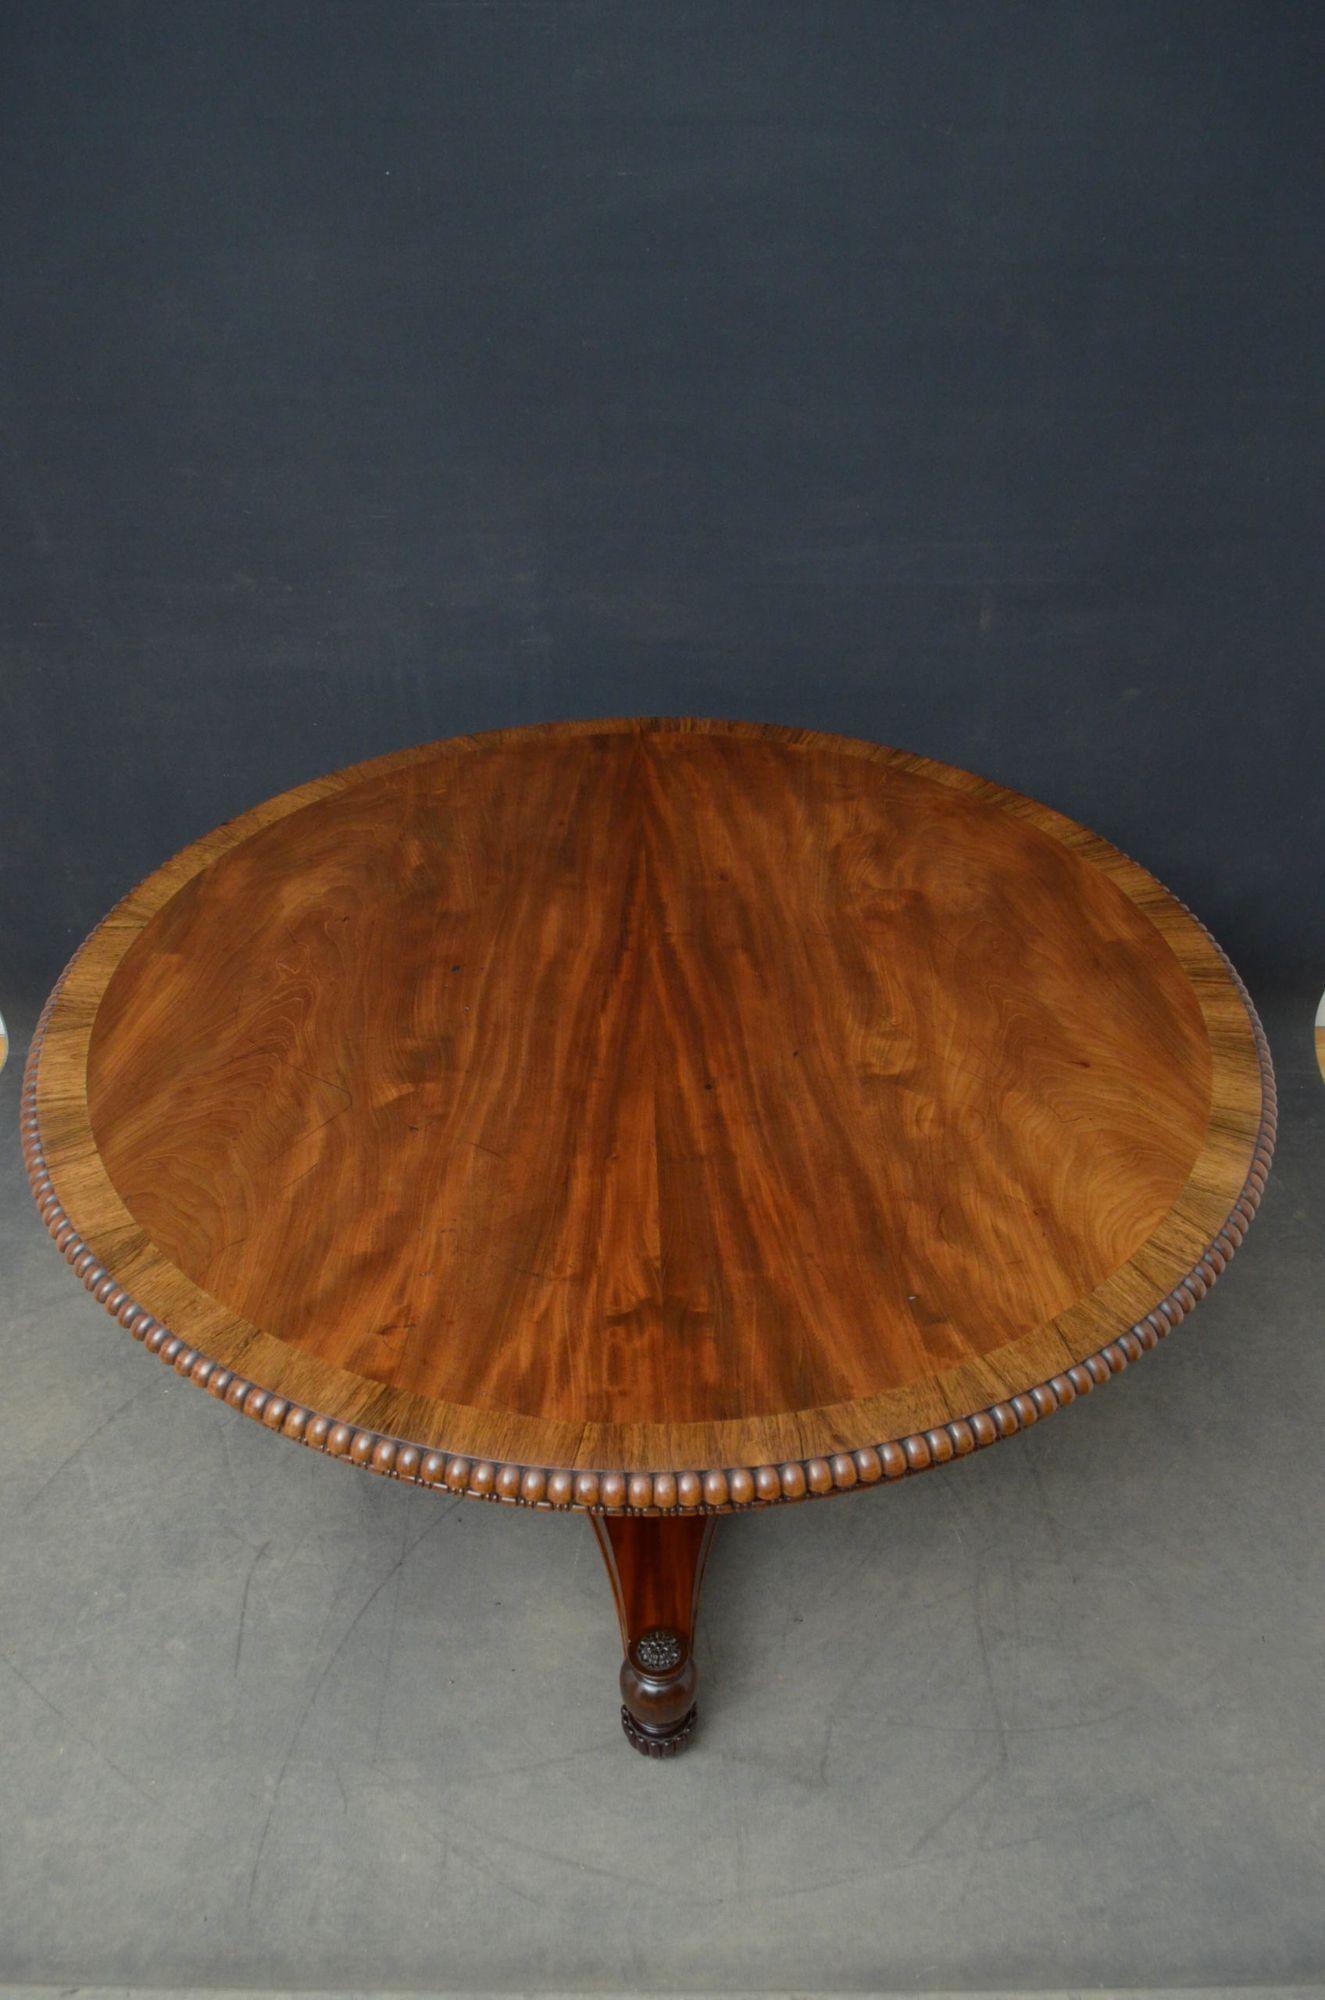 J01 Superb quality Regency, mahogany centre table, having figured mahogany top with rosewood banding and gadroon edge, standing on turned, ringed and fluted column and trefoil base terminating in turned and fluted feet with decorative paterae to the